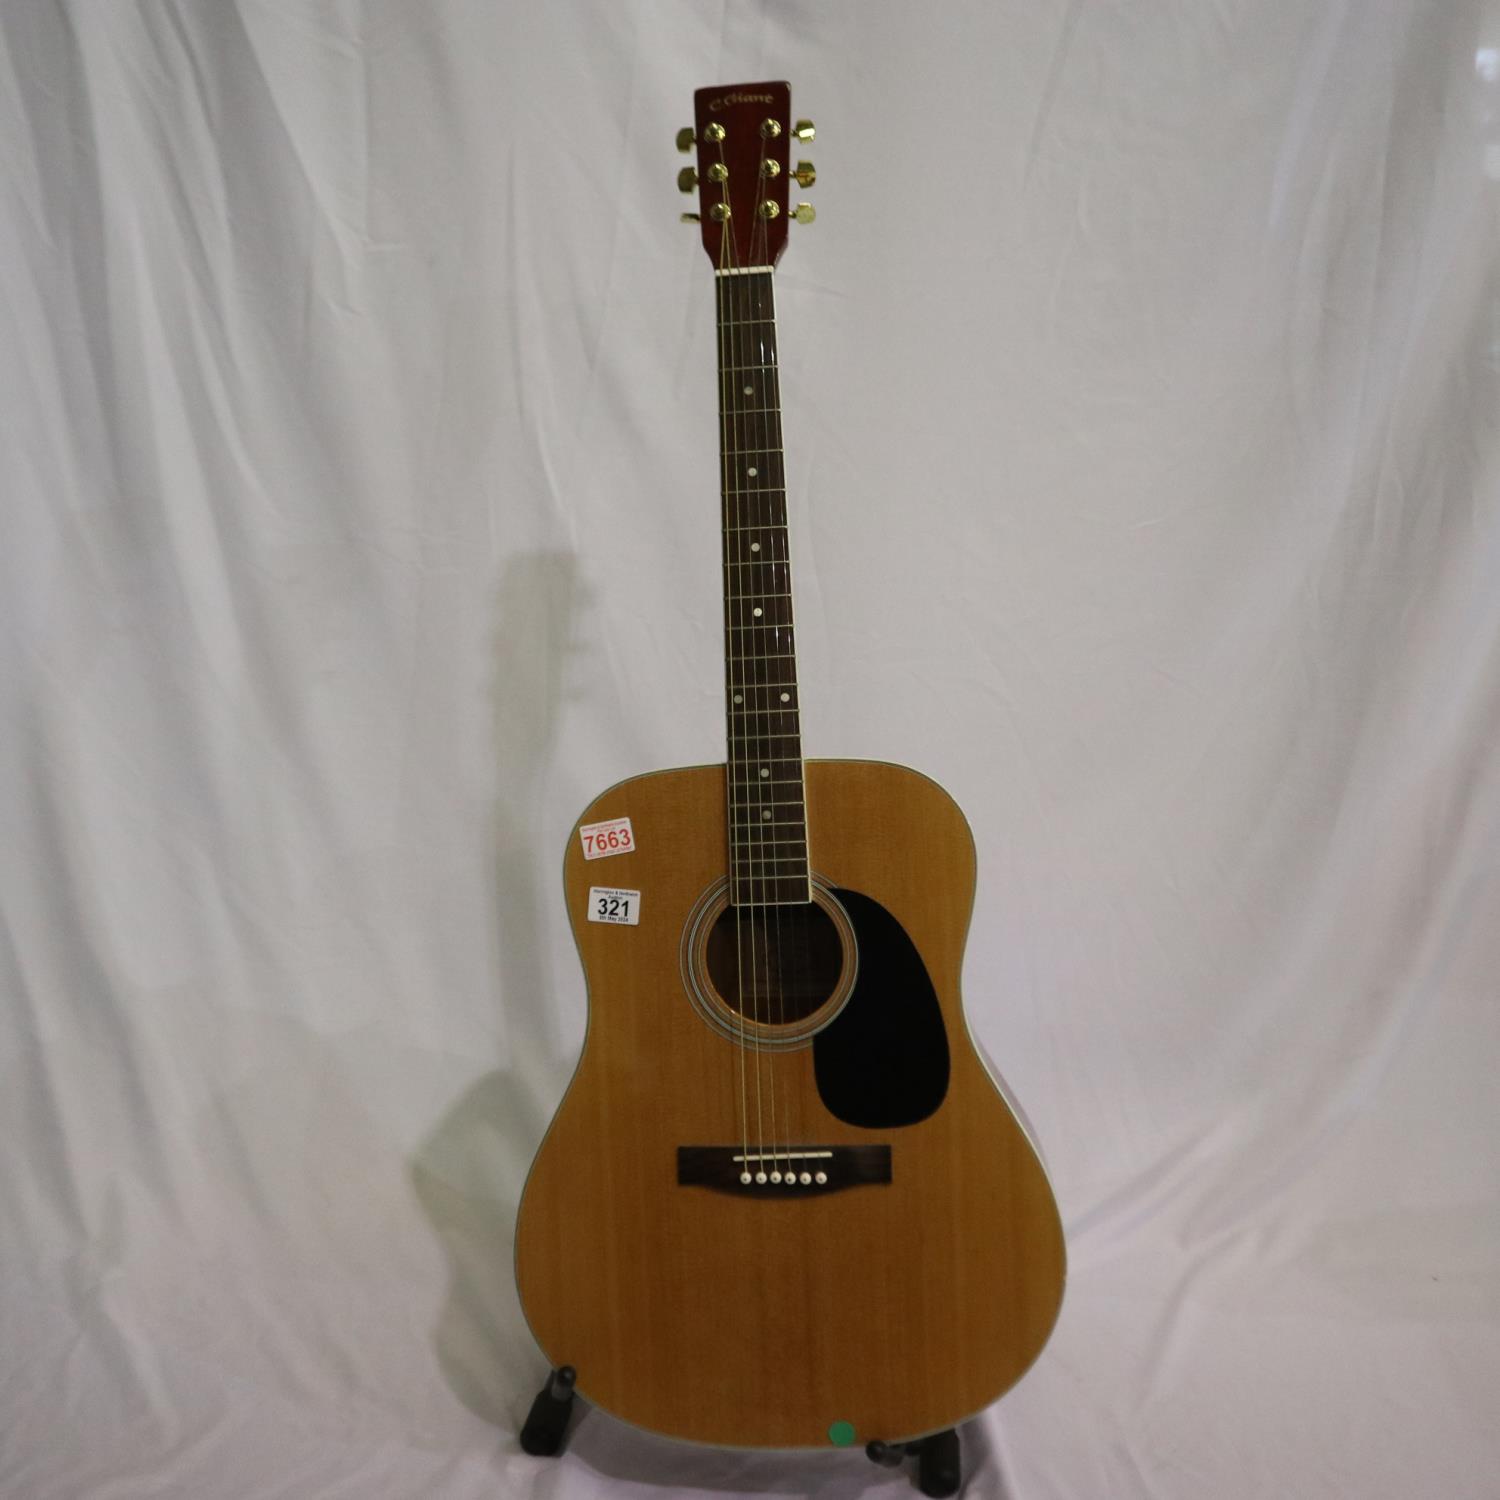 C Giant acoustic guitar. UK P&P Group 3 (£30+VAT for the first lot and £8+VAT for subsequent lots)